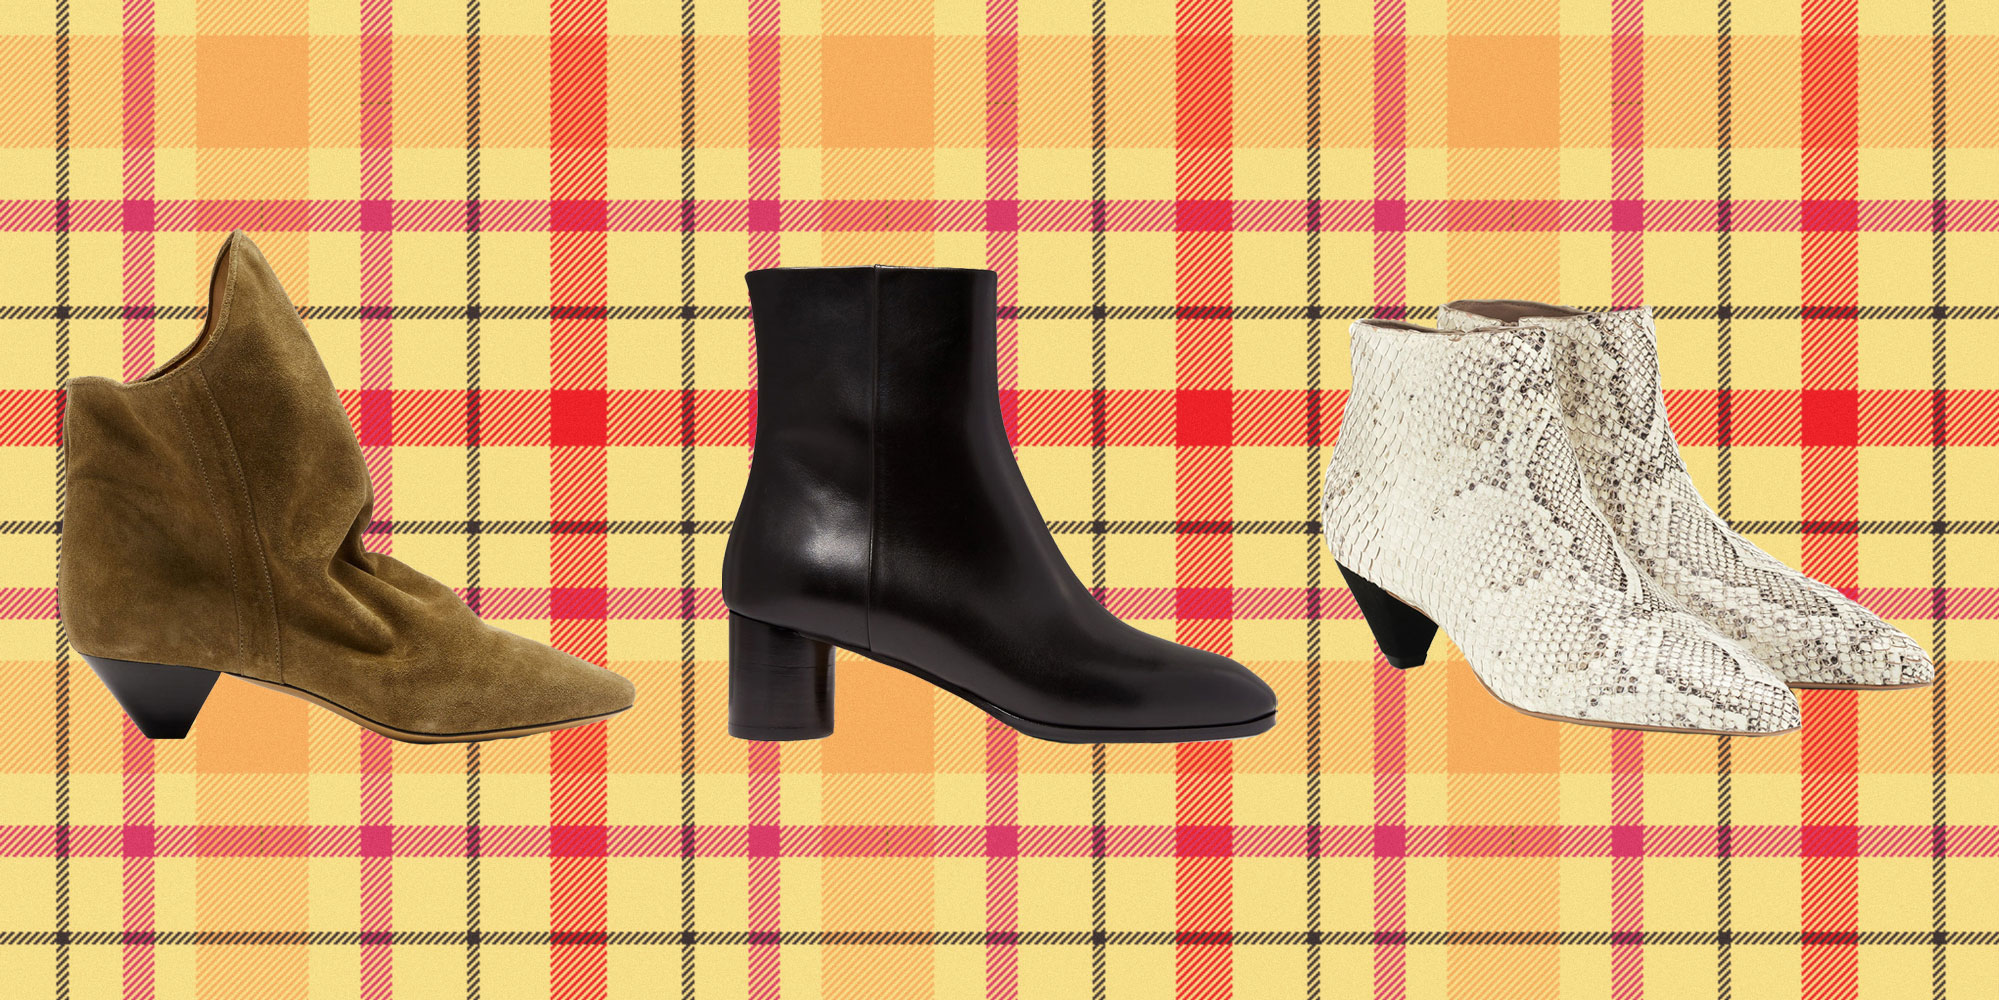 The BEST Ankle Booties Now: 13 